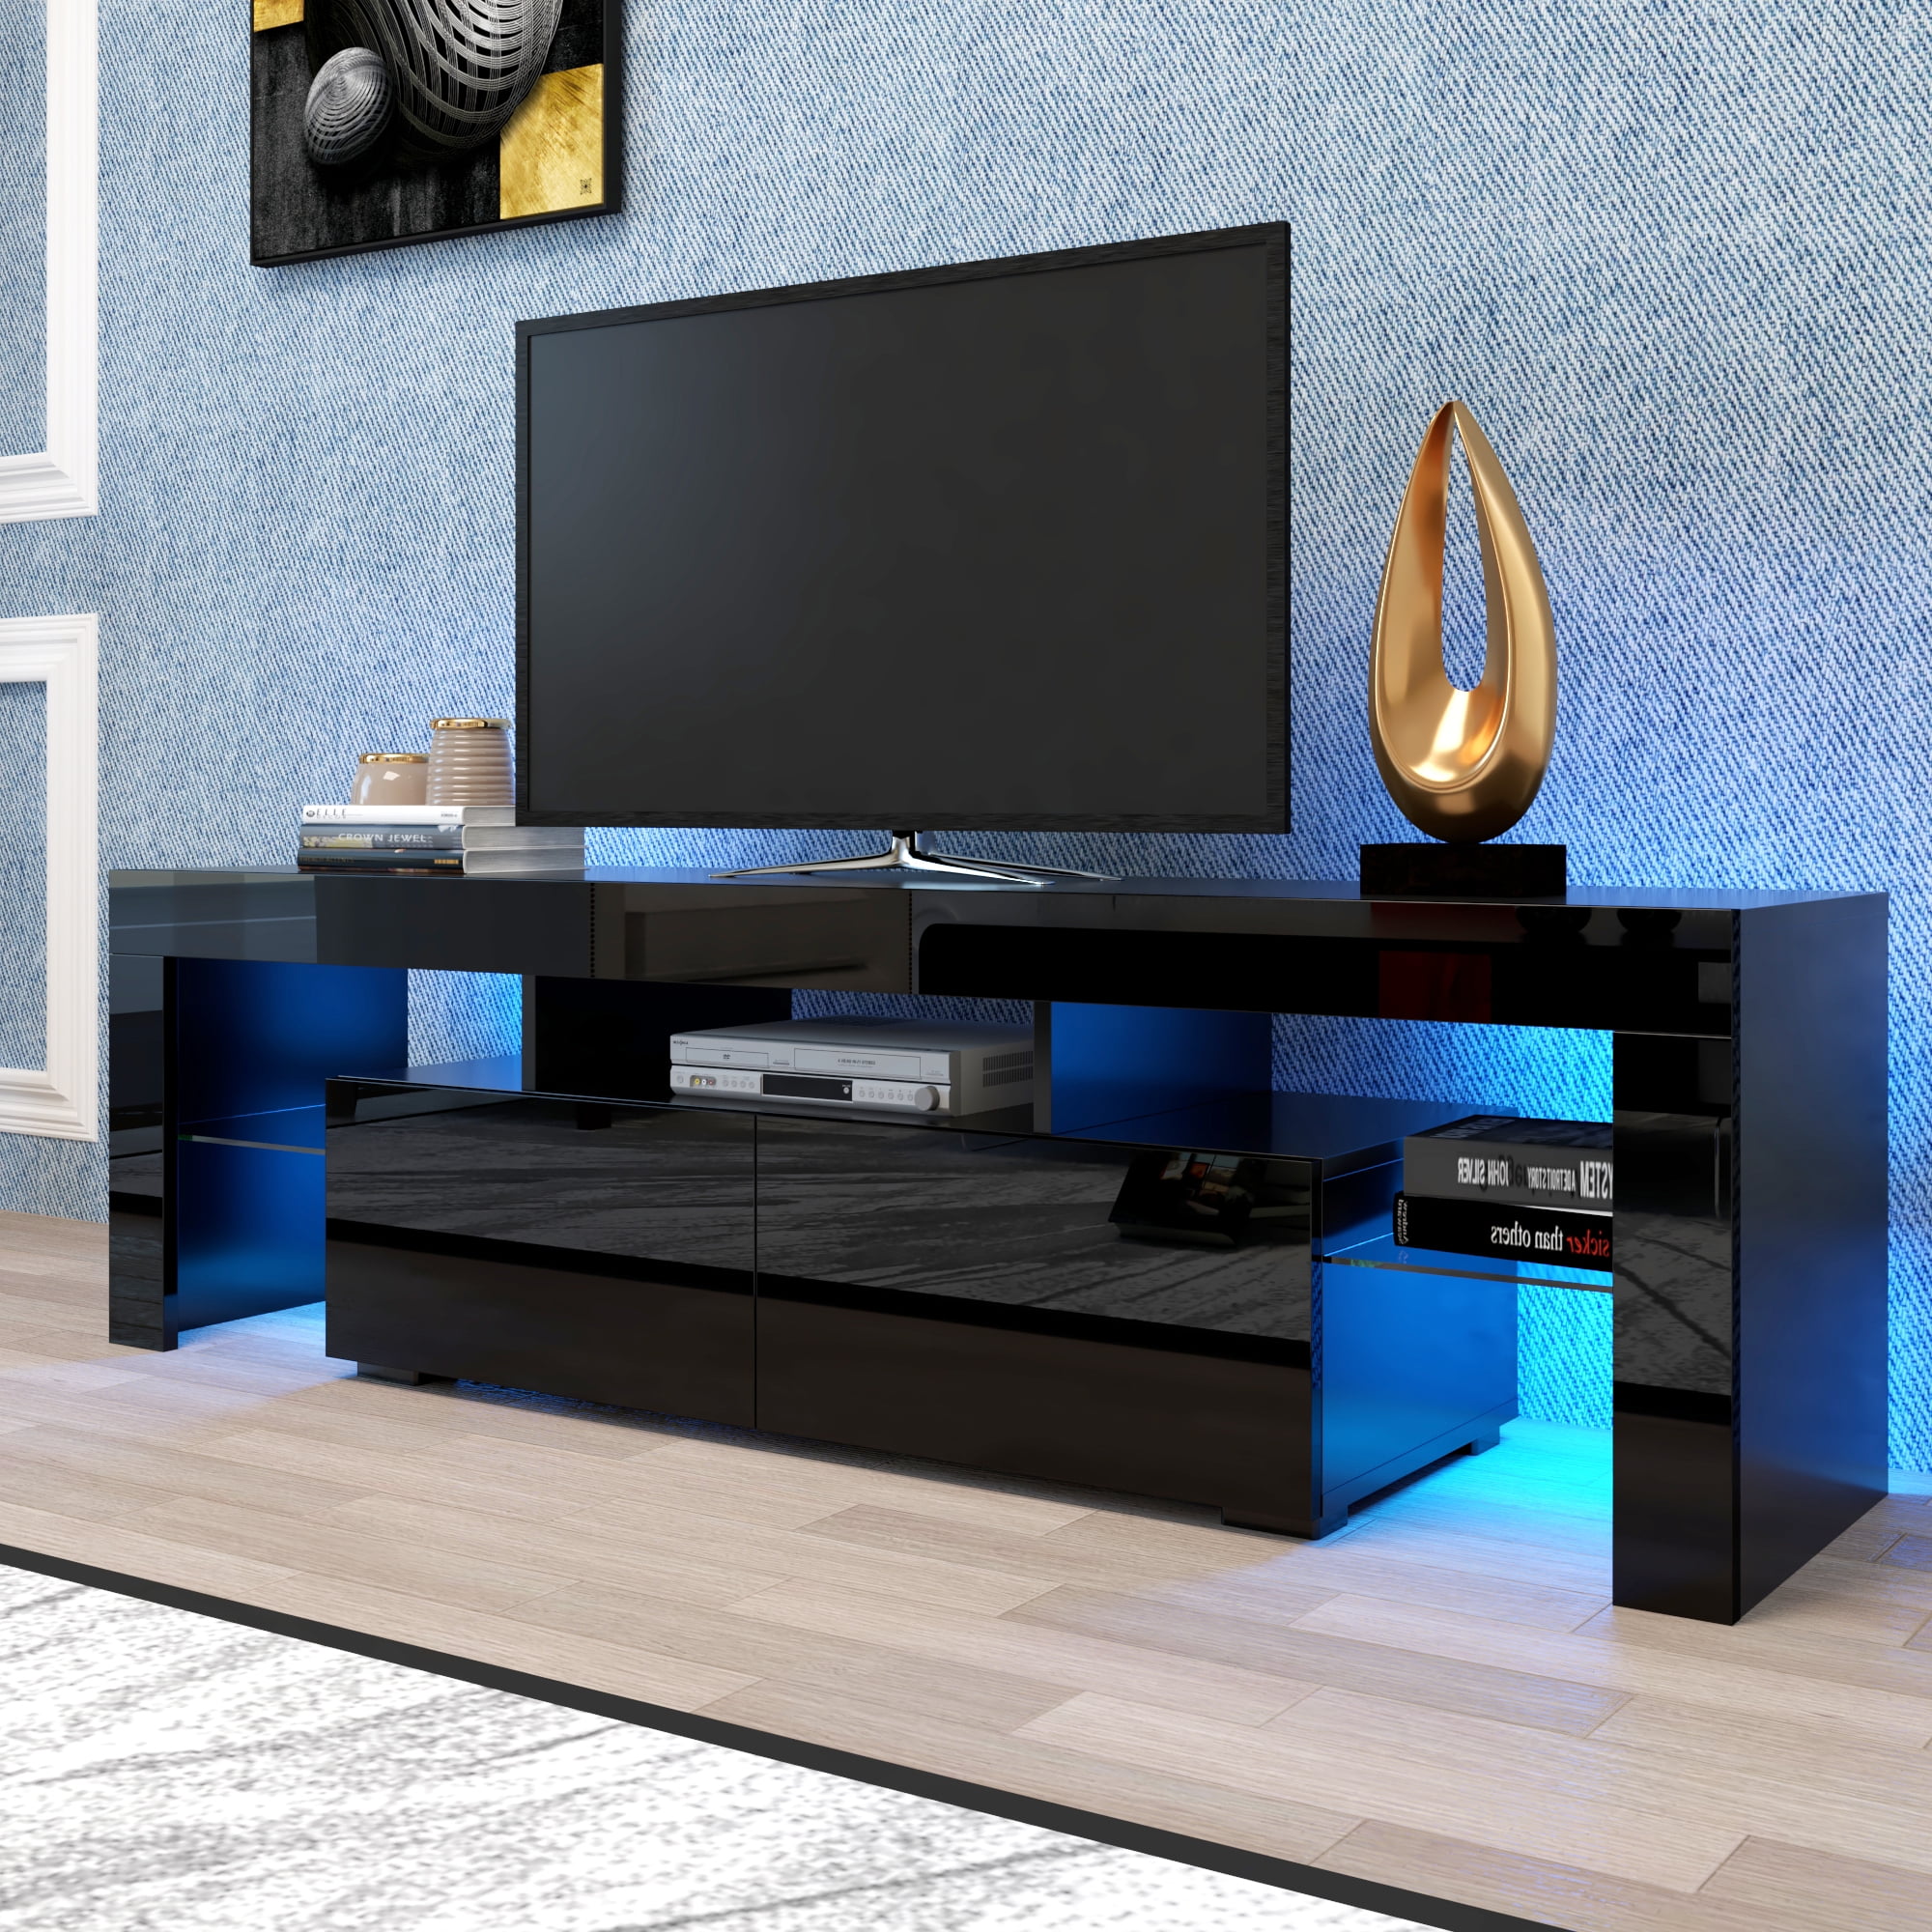 LED Lights Modern Cabinet Sideboard TV Unit Matt Body and High Gloss Fronts 